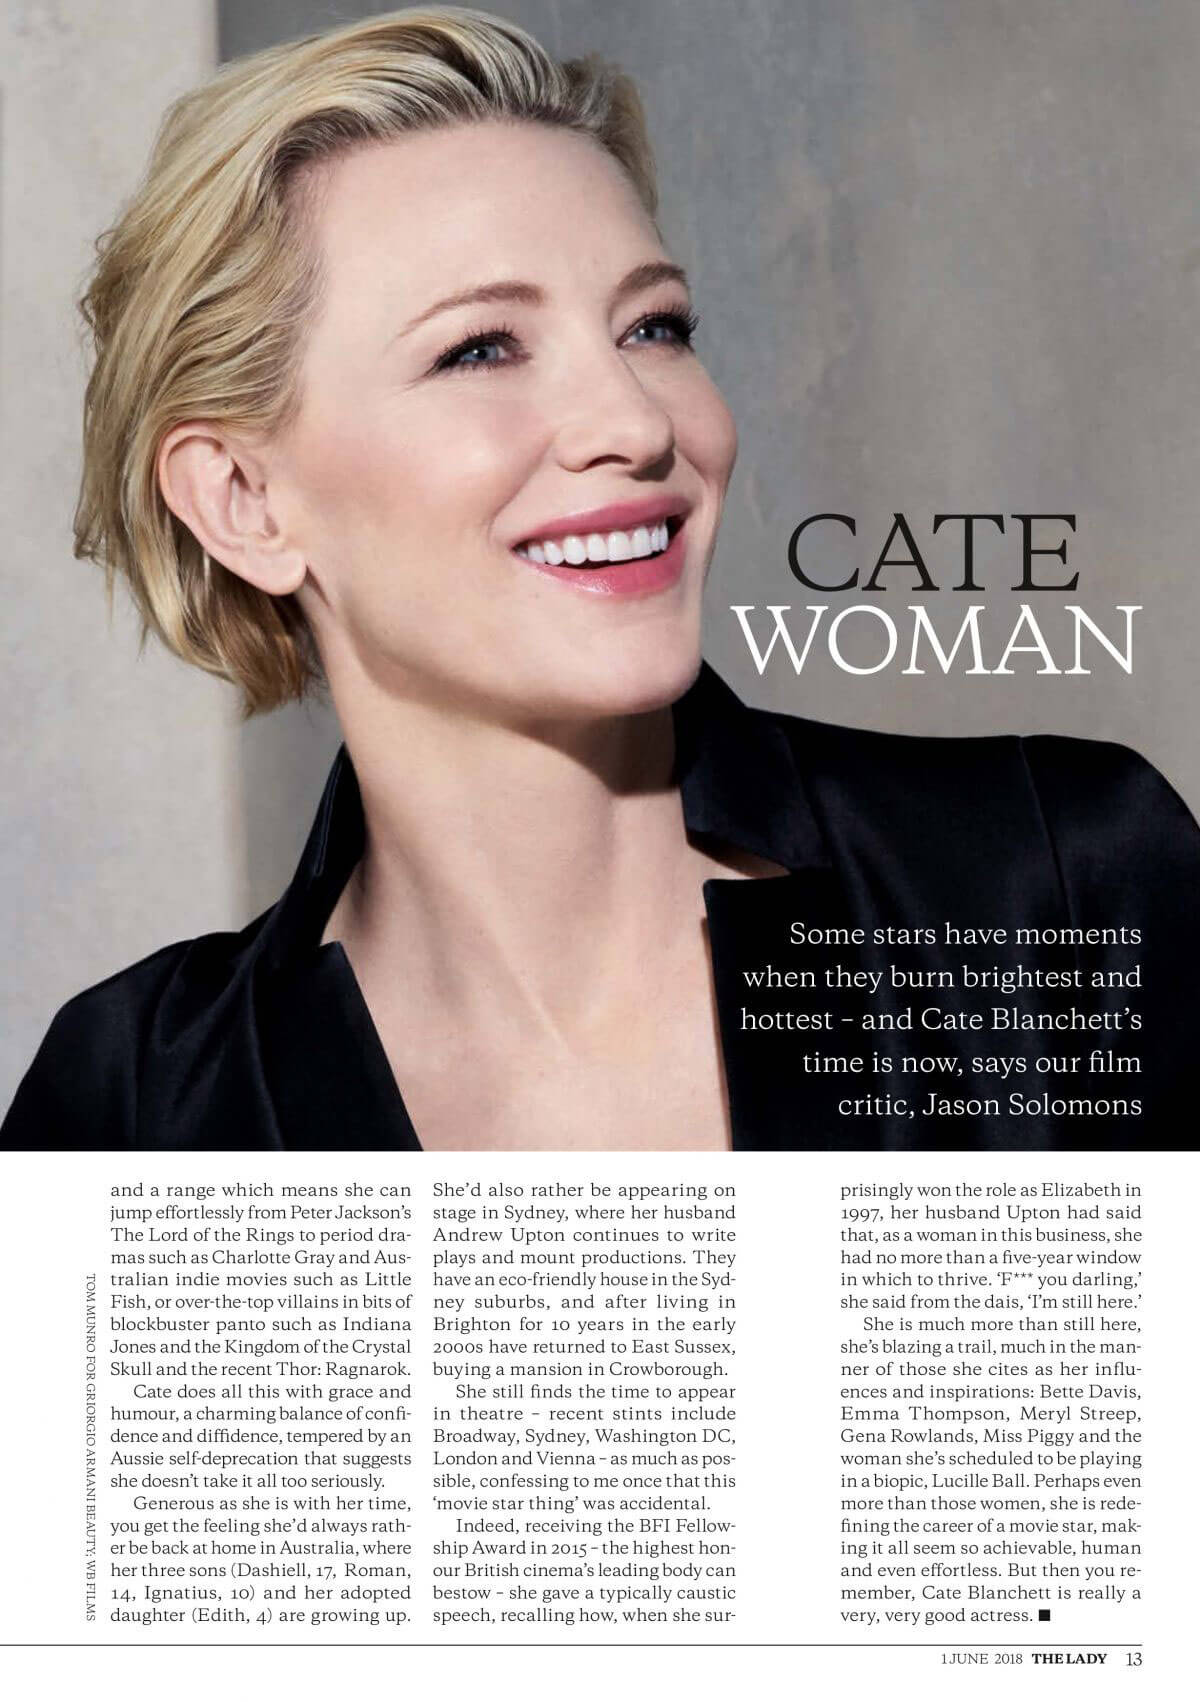 Cate Blanchett in The Lady Magazine, June 2018 Issue